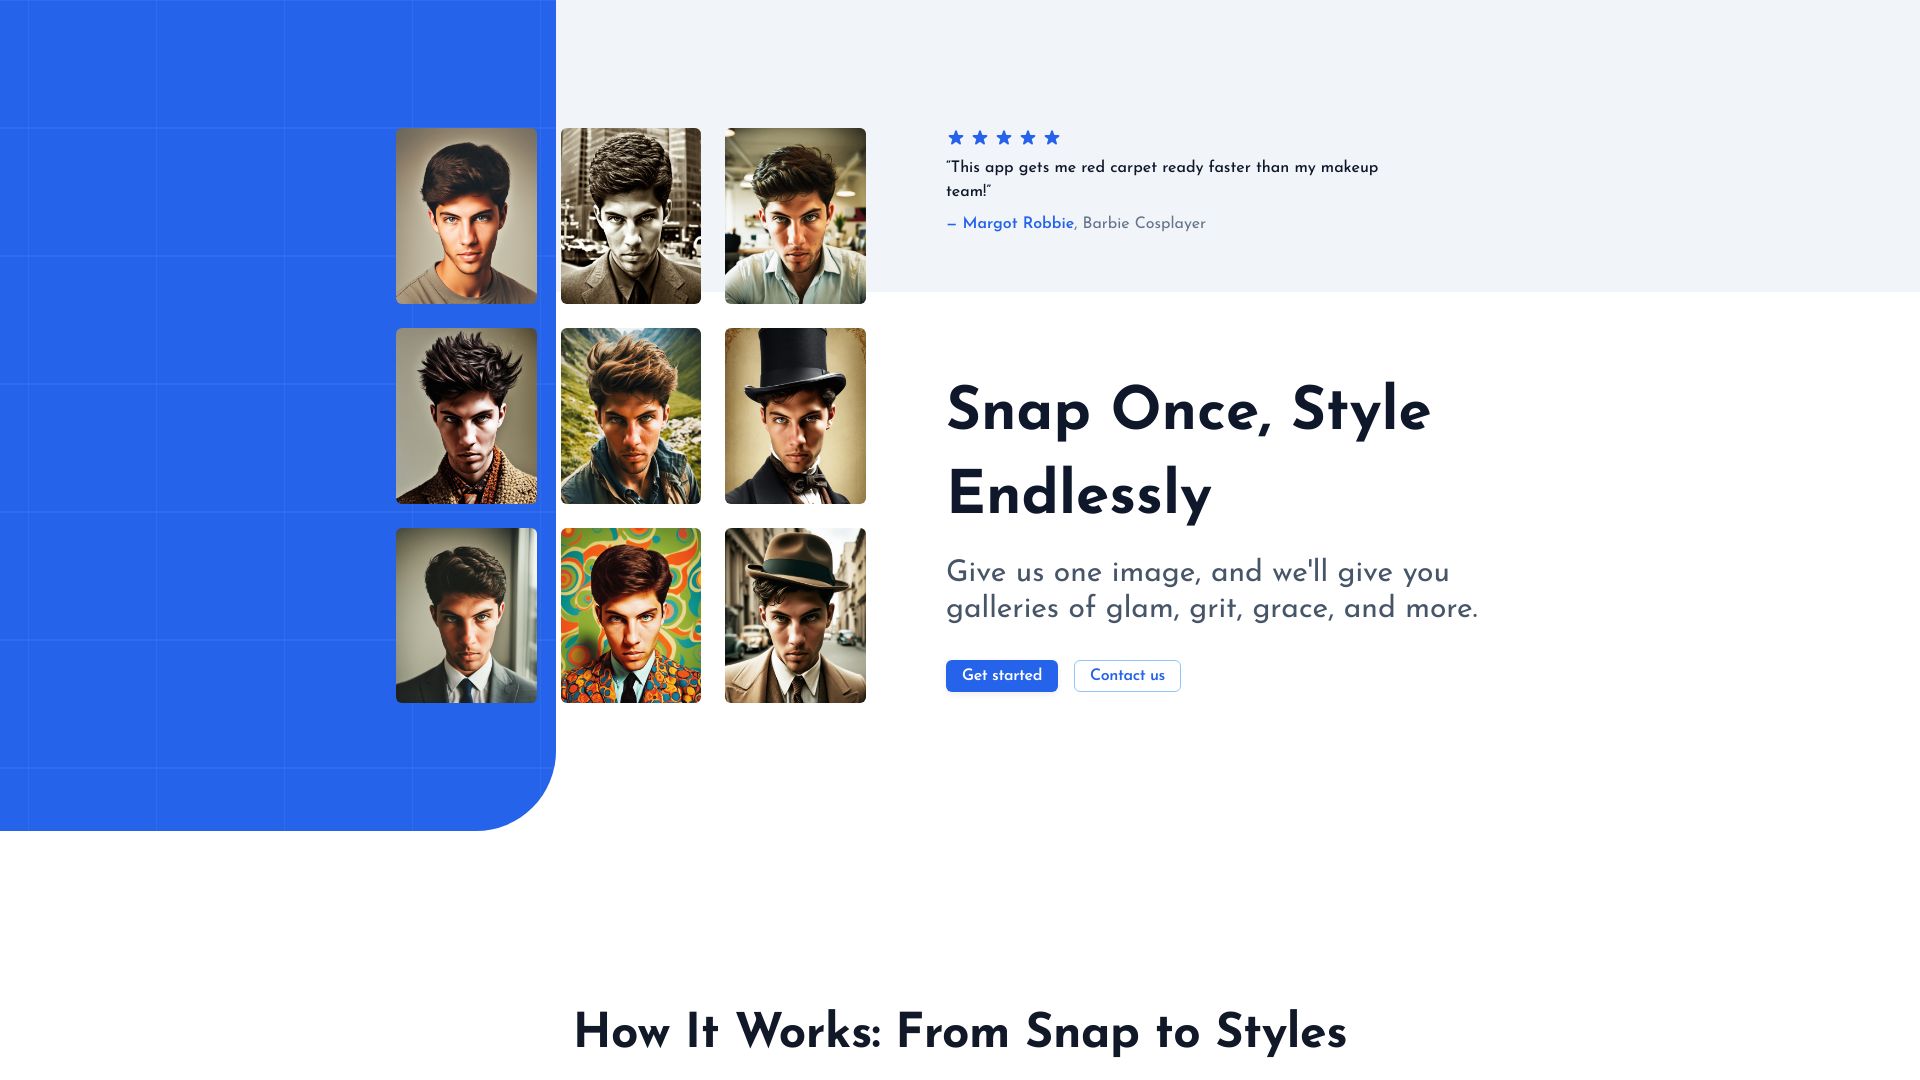 Snap Once, Style Endlessly